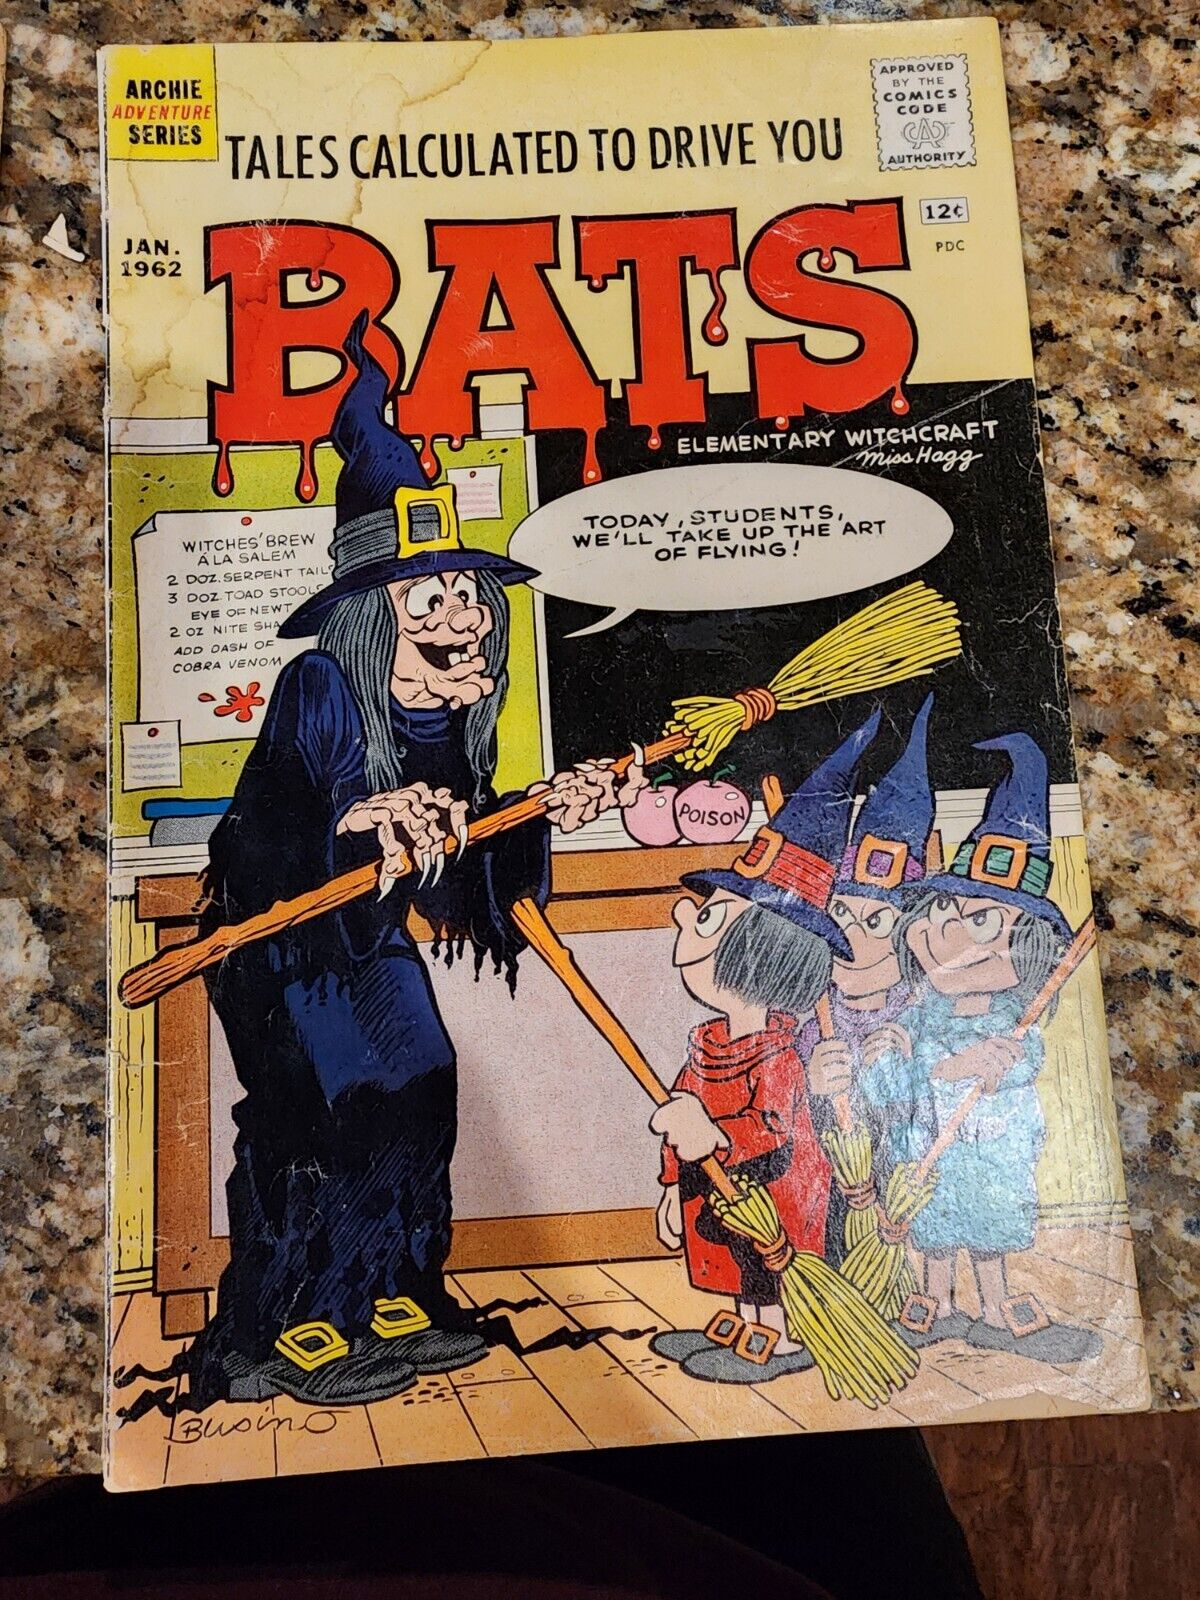 Tales Calculated to Drive You Bats #2 Archie Comics 1962. Top Quality.